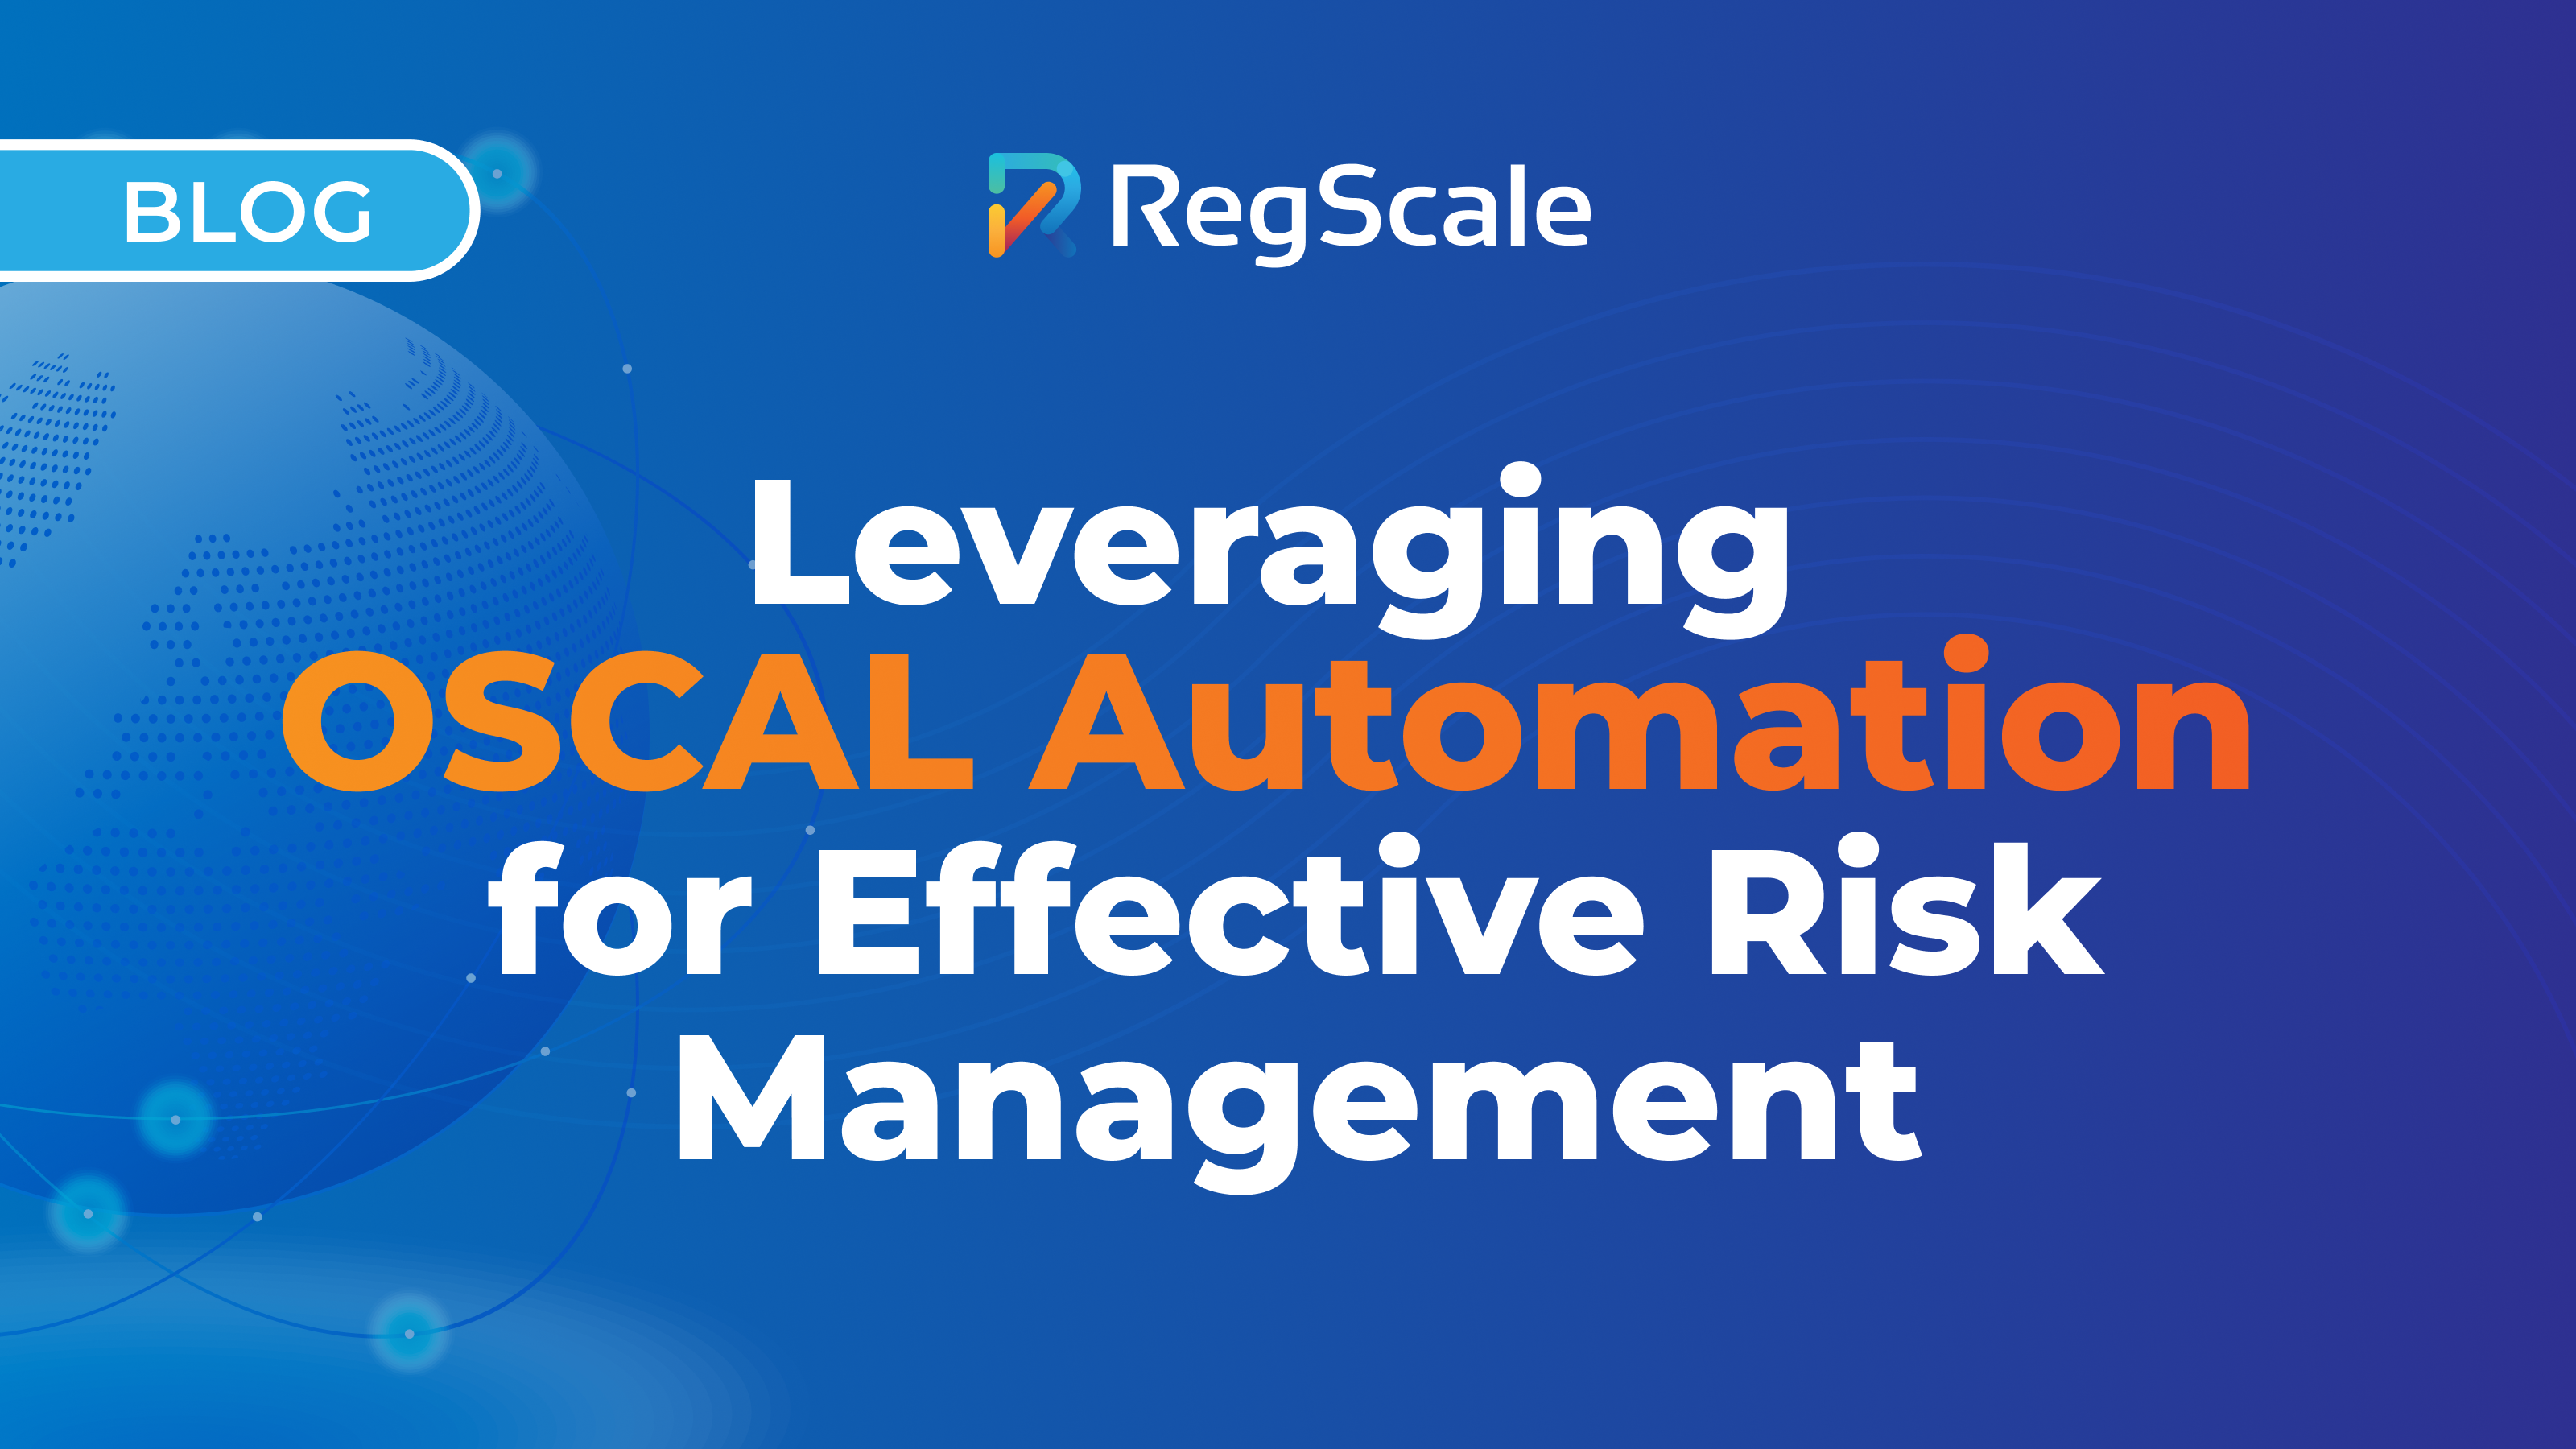 Streamlining Compliance: Leveraging OSCAL Automation for Effective Risk Management